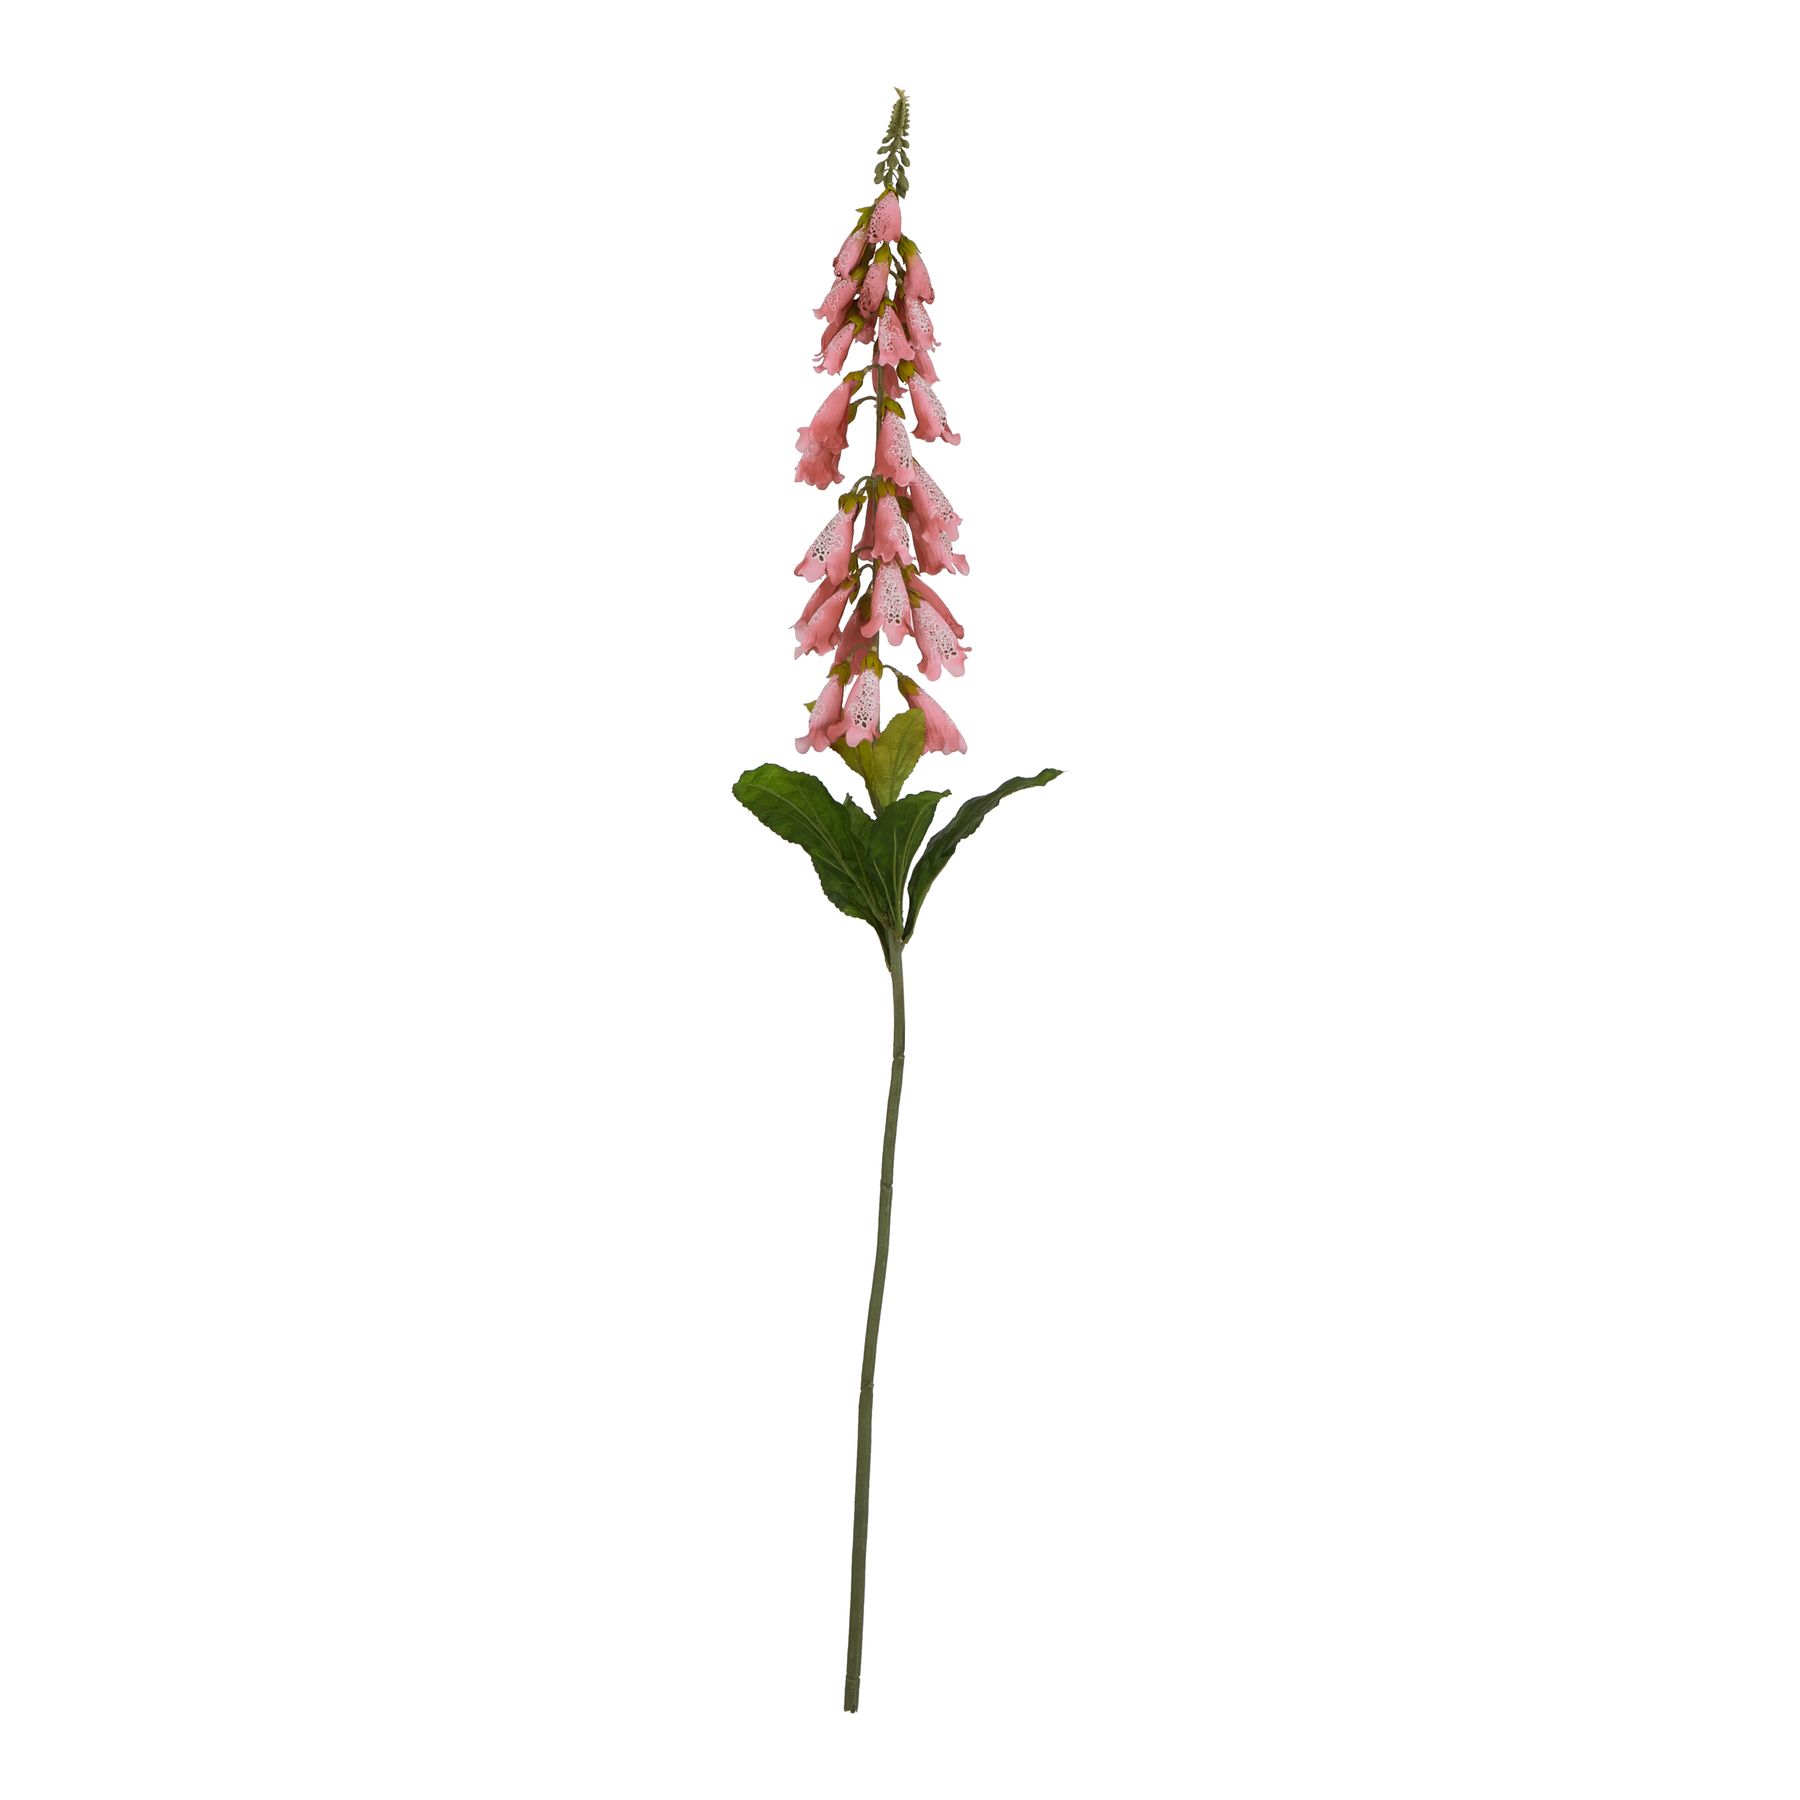 The Natural Garden Collection Pale Pink Foxglove - Image 1